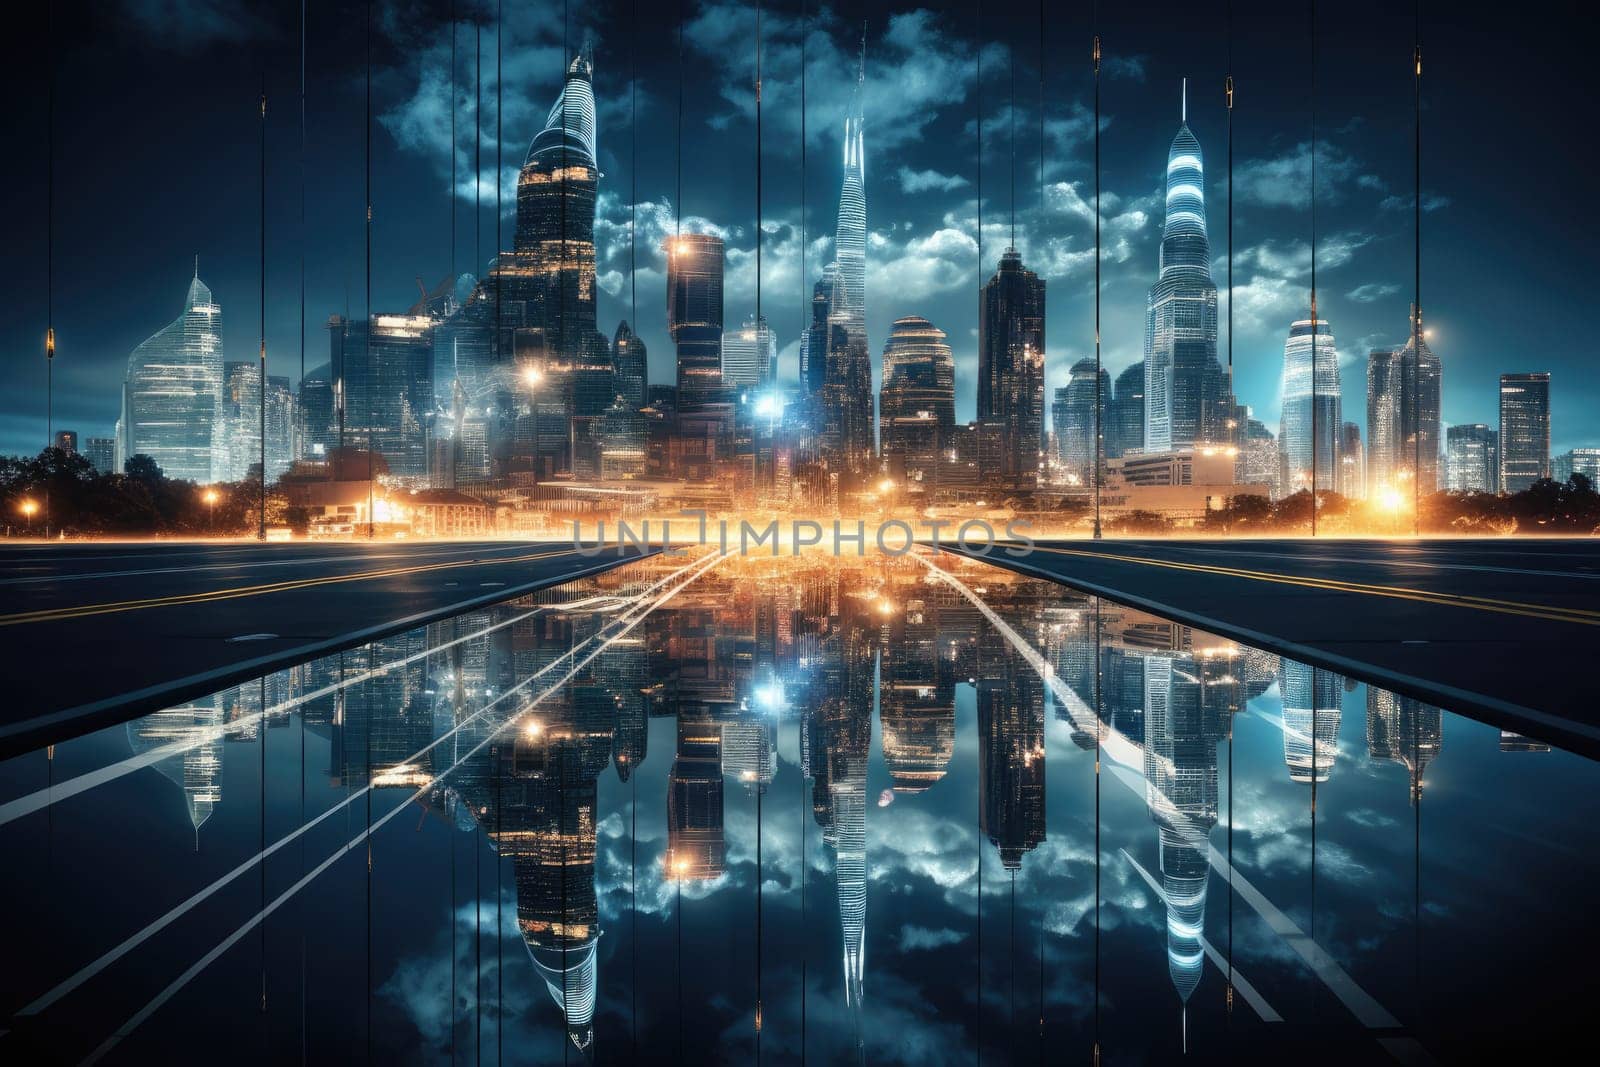 Abstract night city background Smart cities, AI and digital transformation concepts embrace the world of the future by Generative AI.